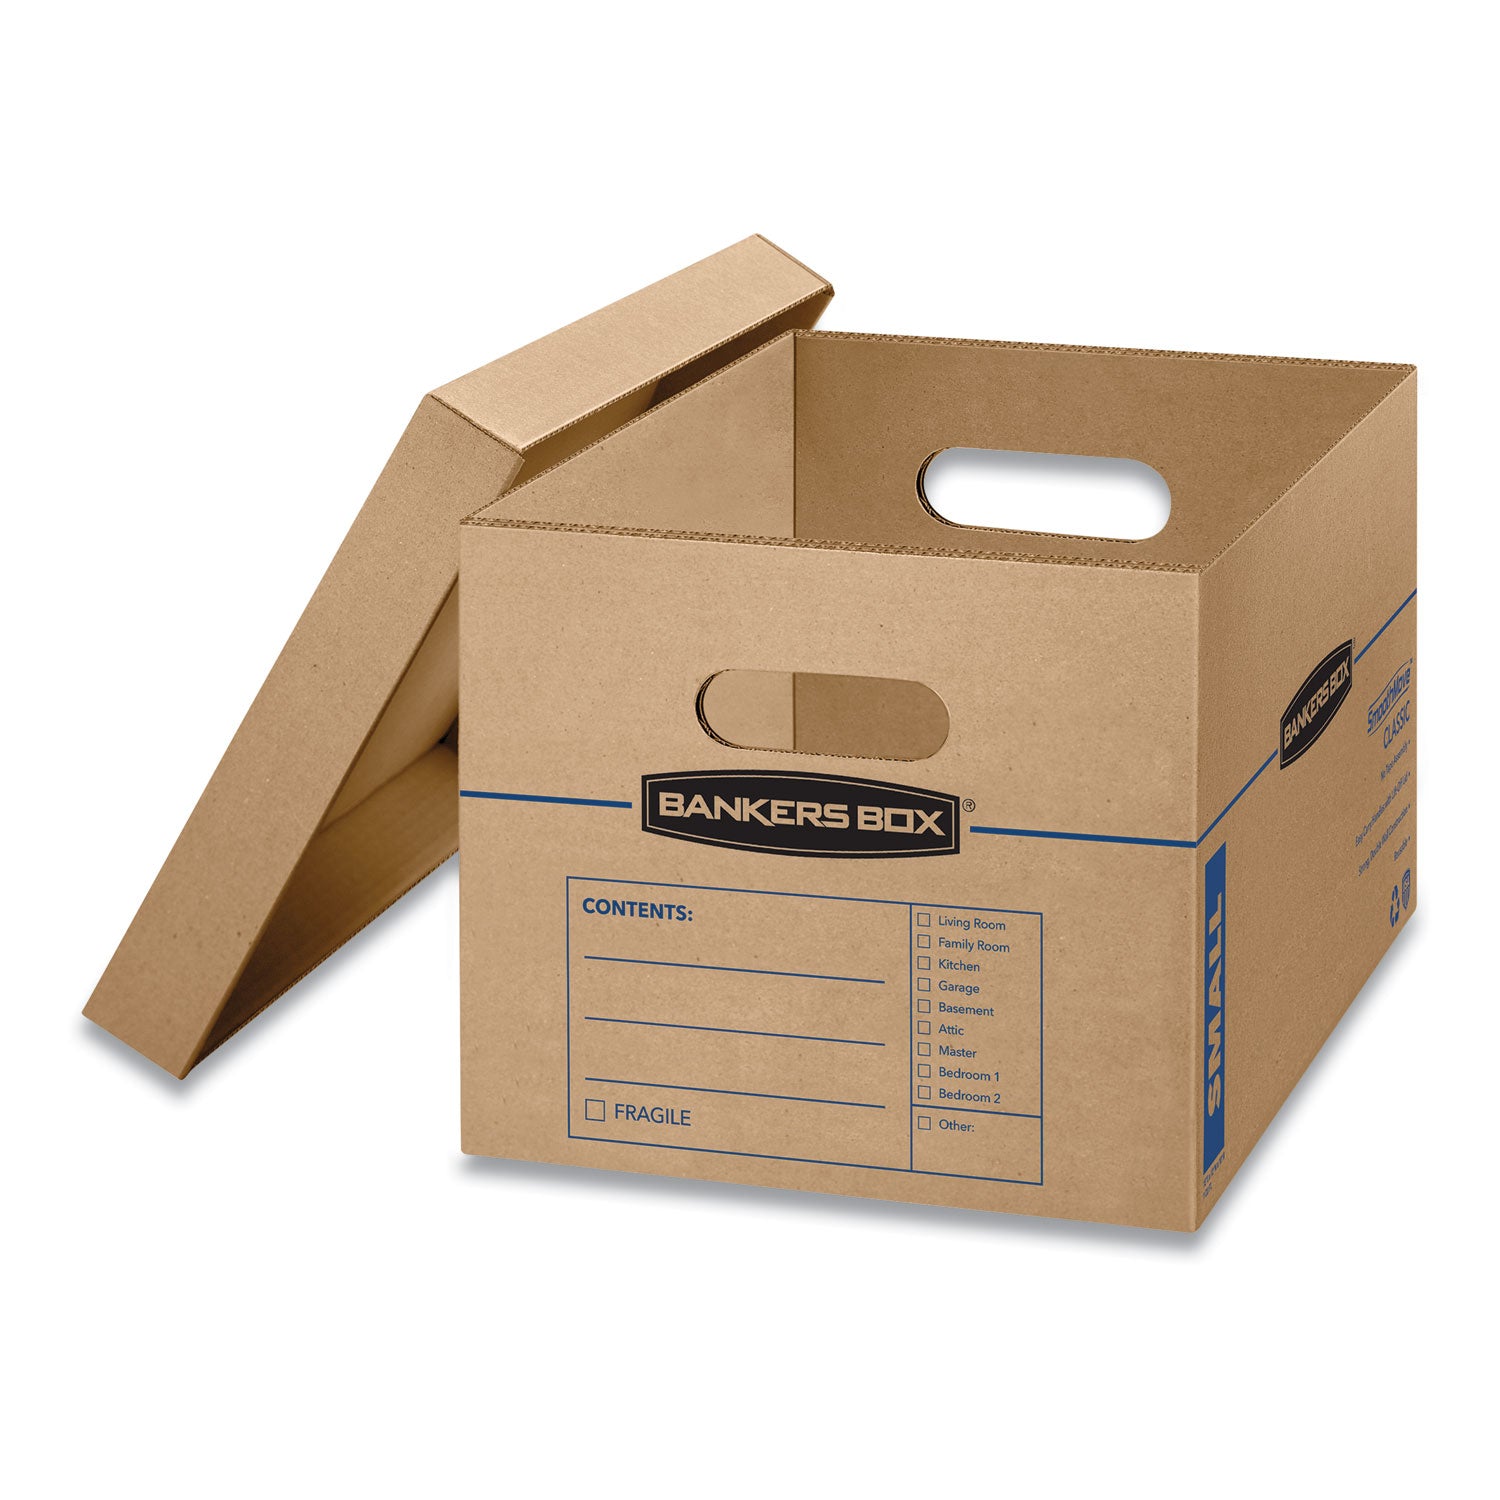 SmoothMove Classic Moving/Storage Boxes, Half Slotted Container (HSC), Small, 12" x 15" x 10", Brown/Blue, 15/Carton - 